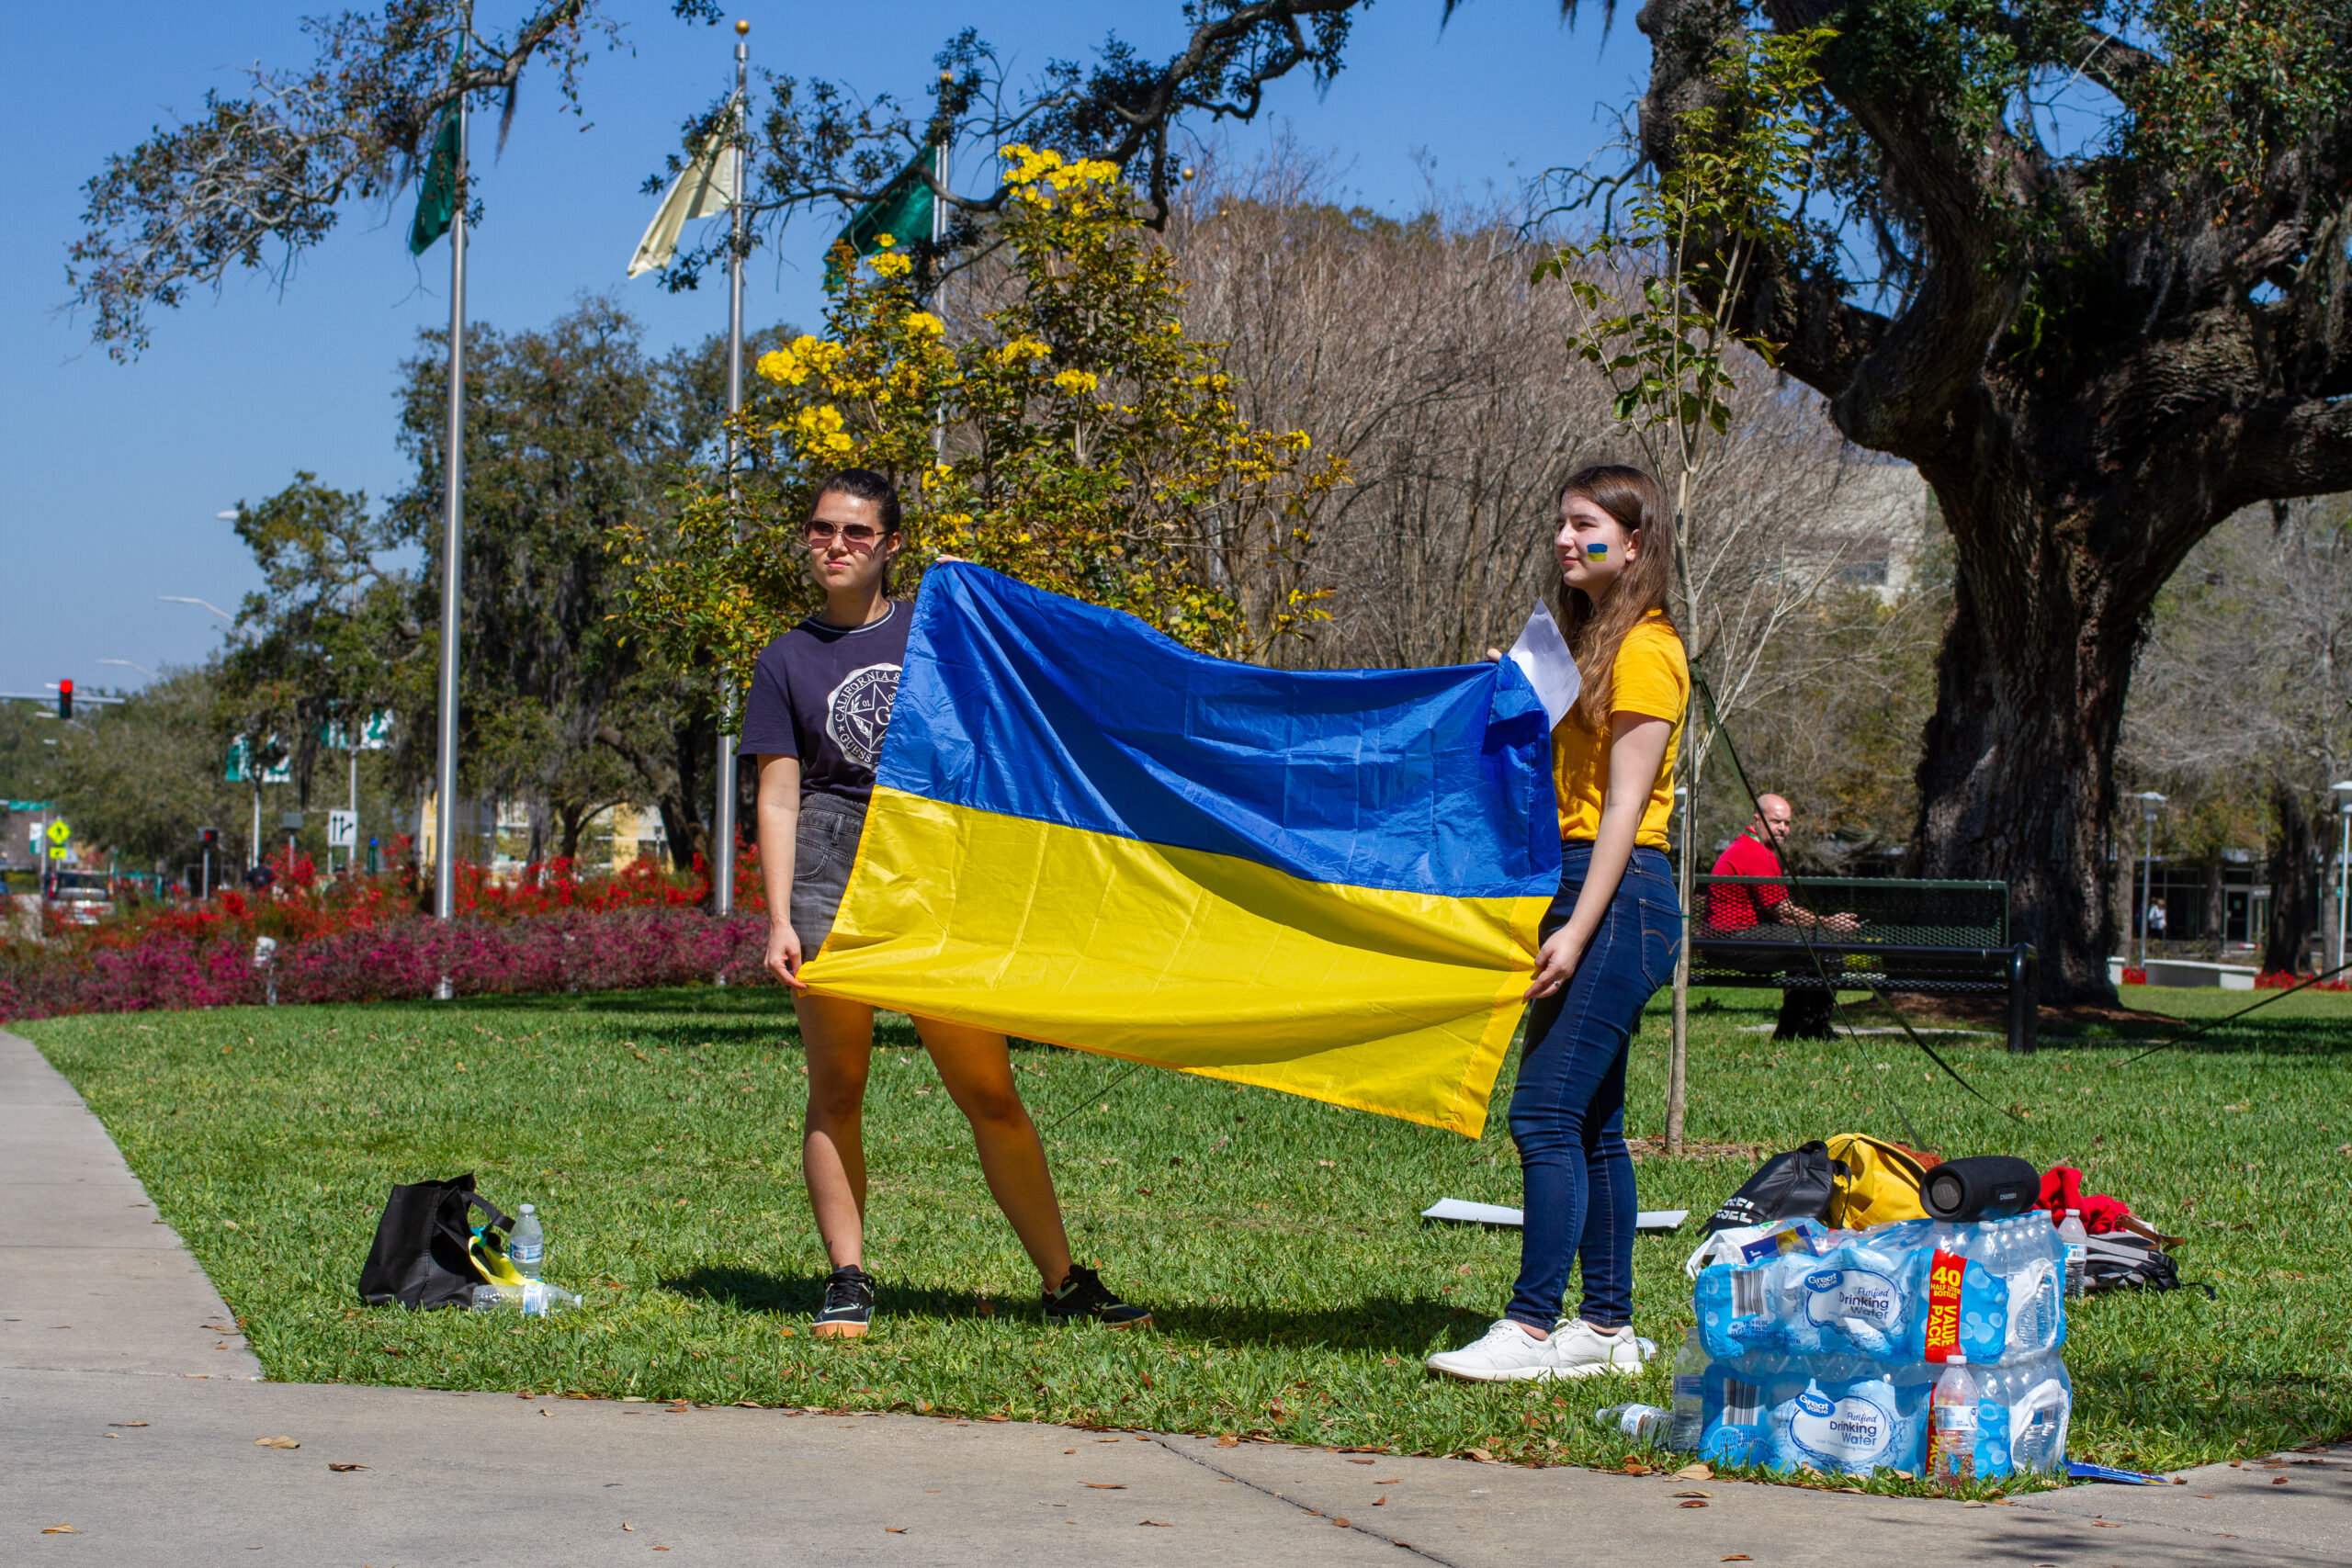 Ukrainian students raise awareness for humanitarian resources, request university support